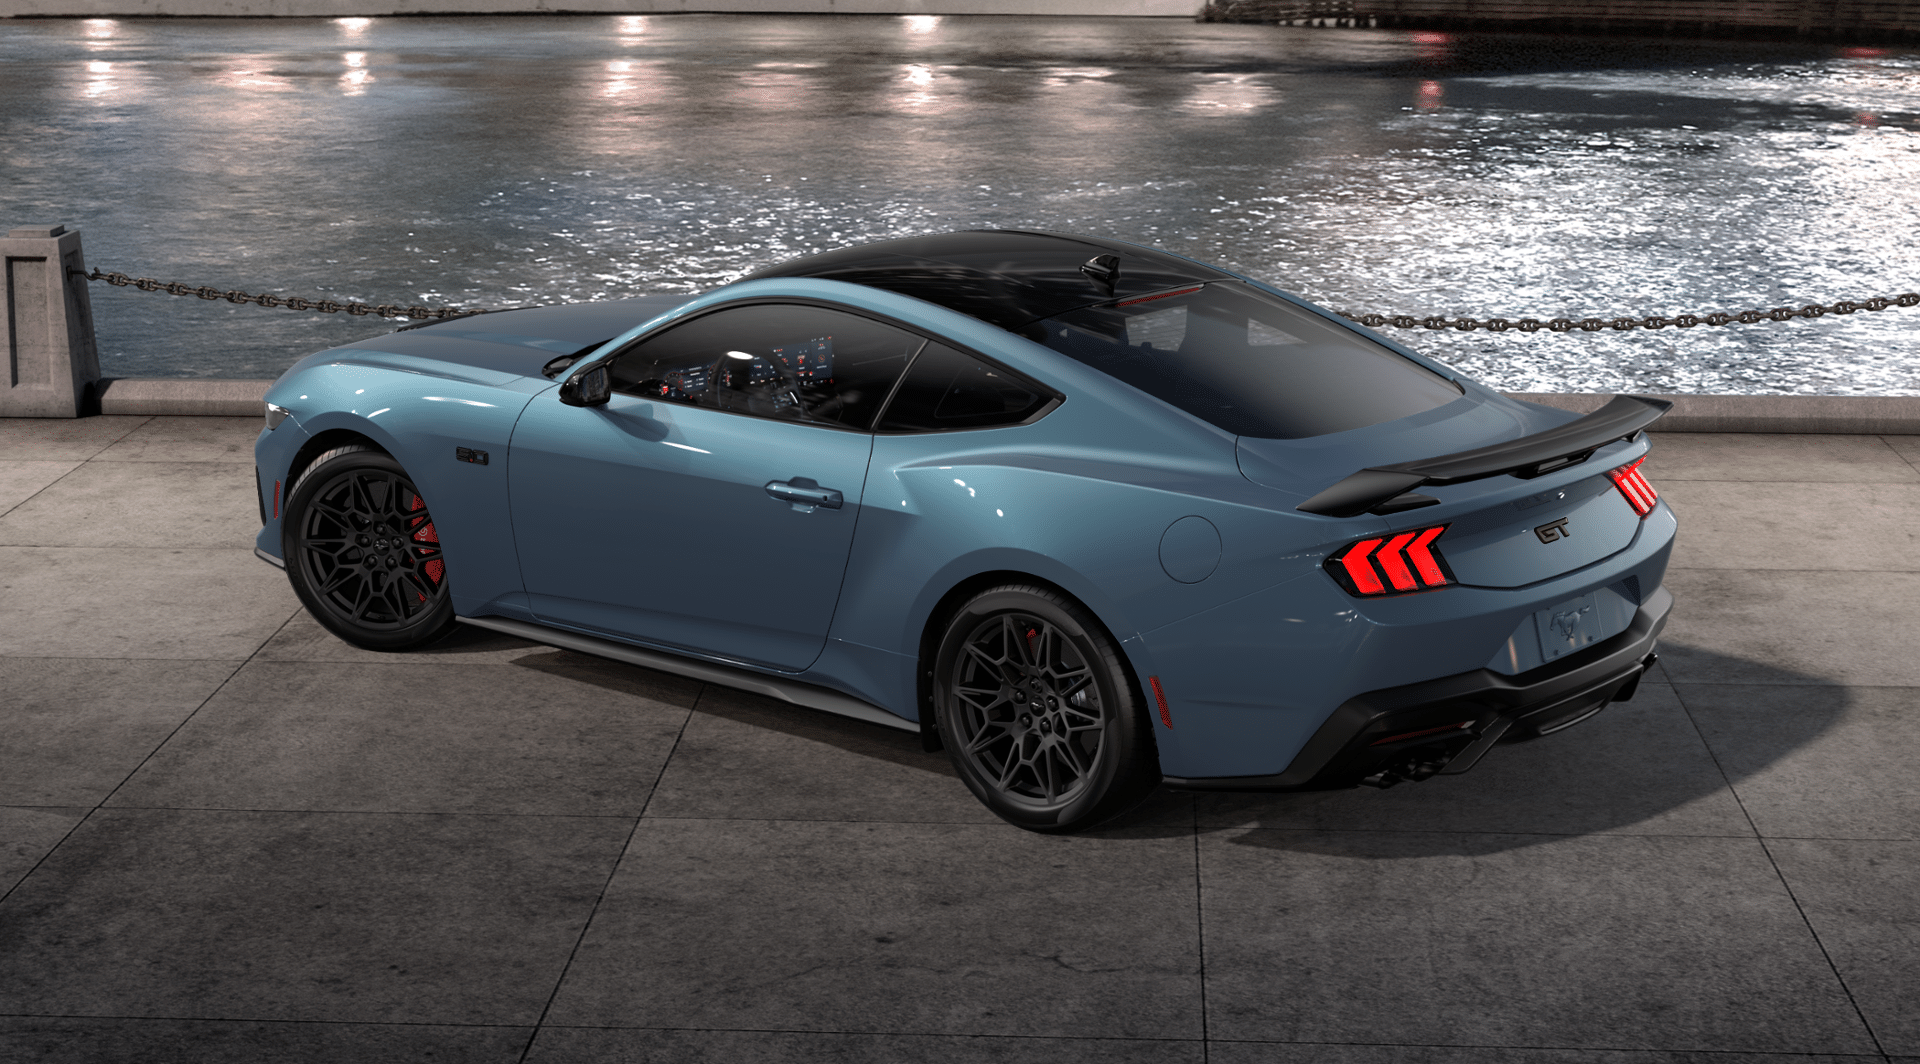 S650 Mustang Official VAPOR BLUE Mustang S650 Thread vehicle2